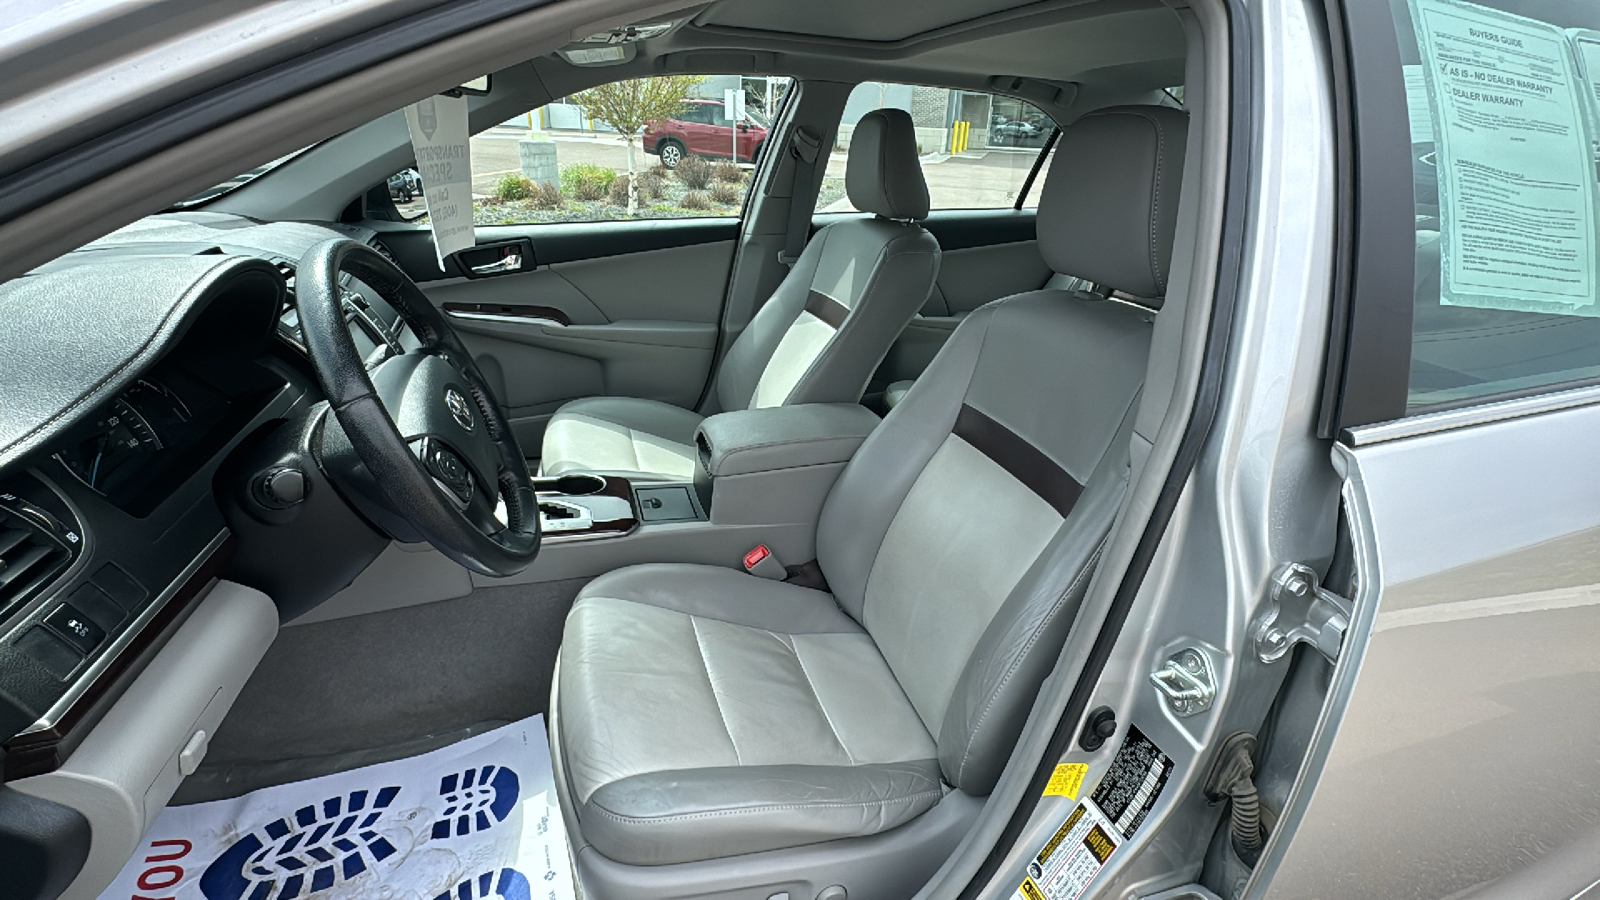 2012 Toyota Camry XLE 21